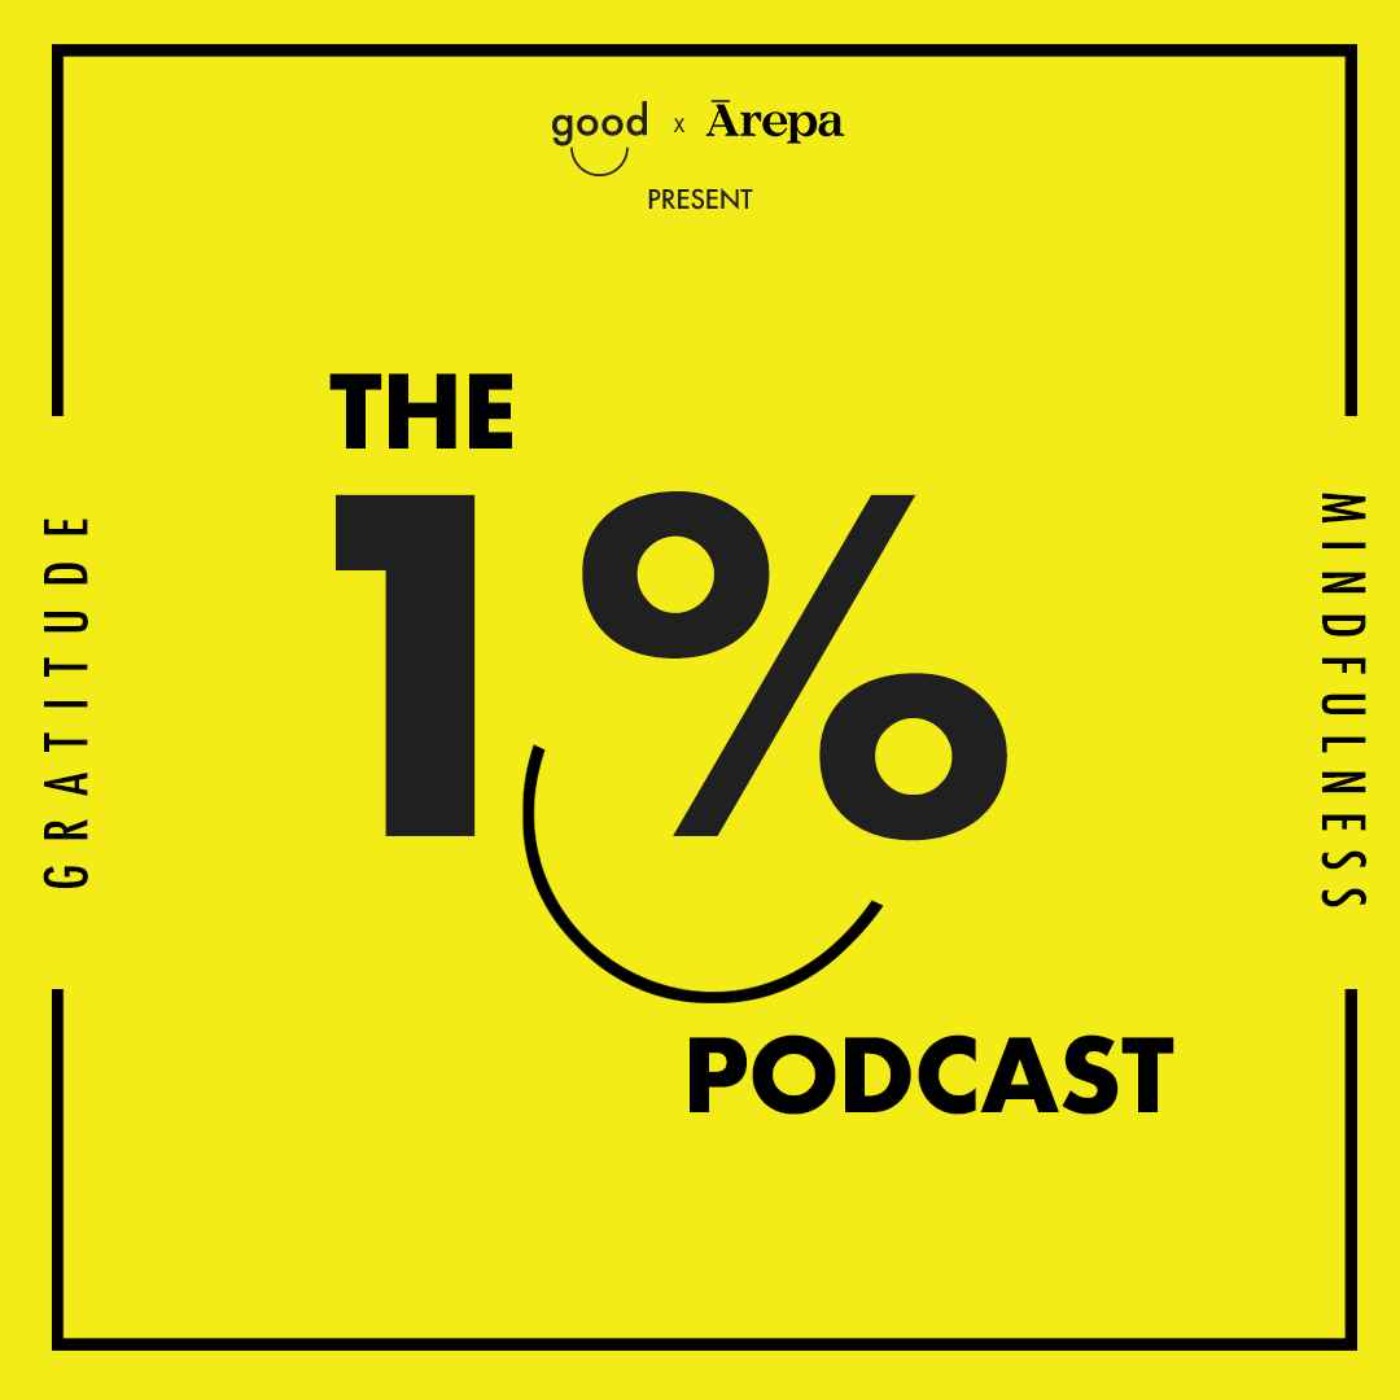 1% Pod - These Habits Will Change Your Life!